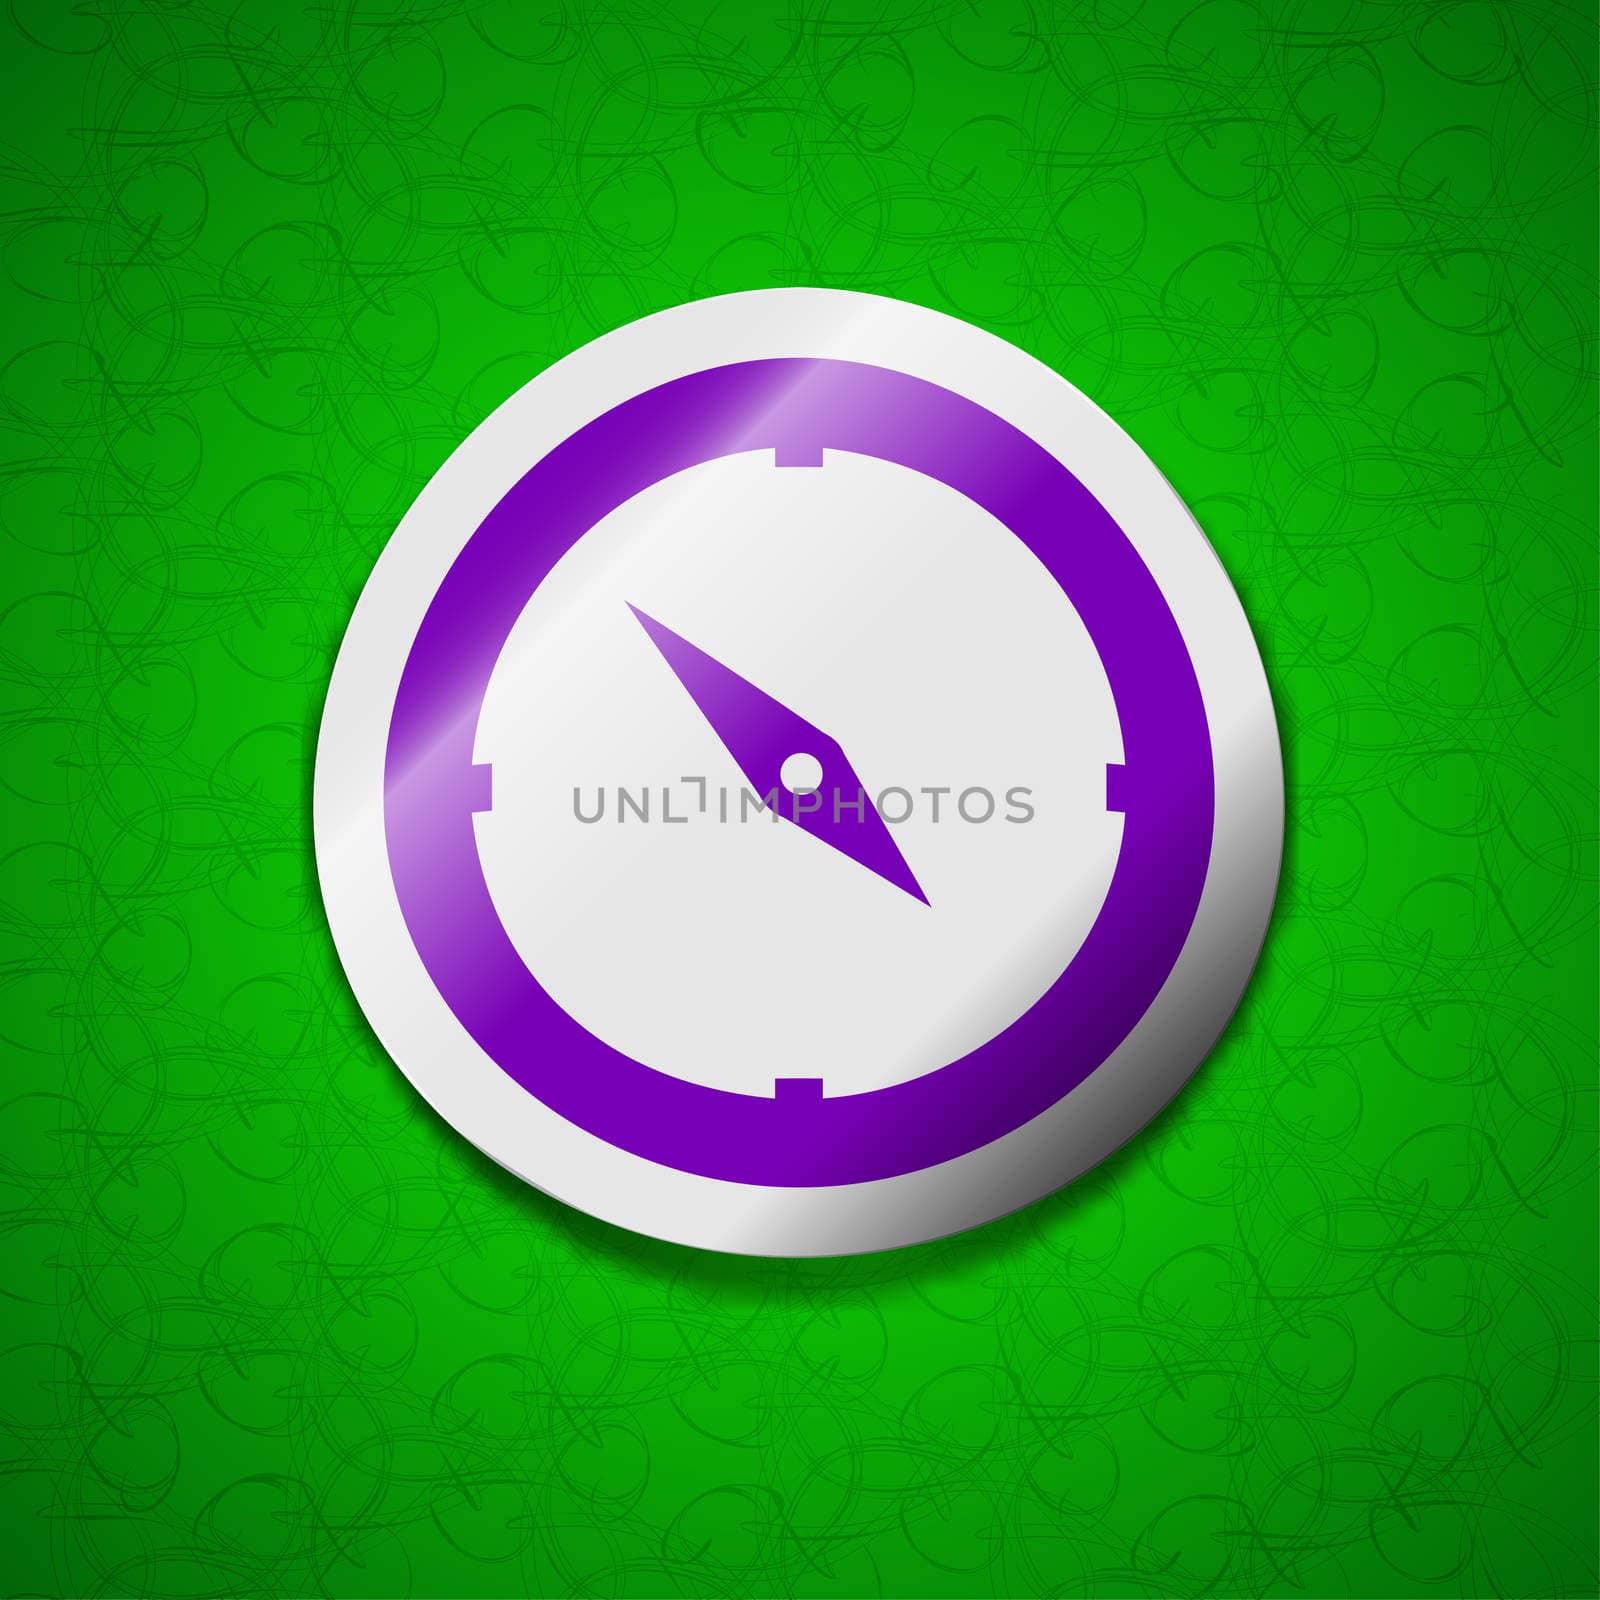 Compass icon sign. Symbol chic colored sticky label on green background. illustration